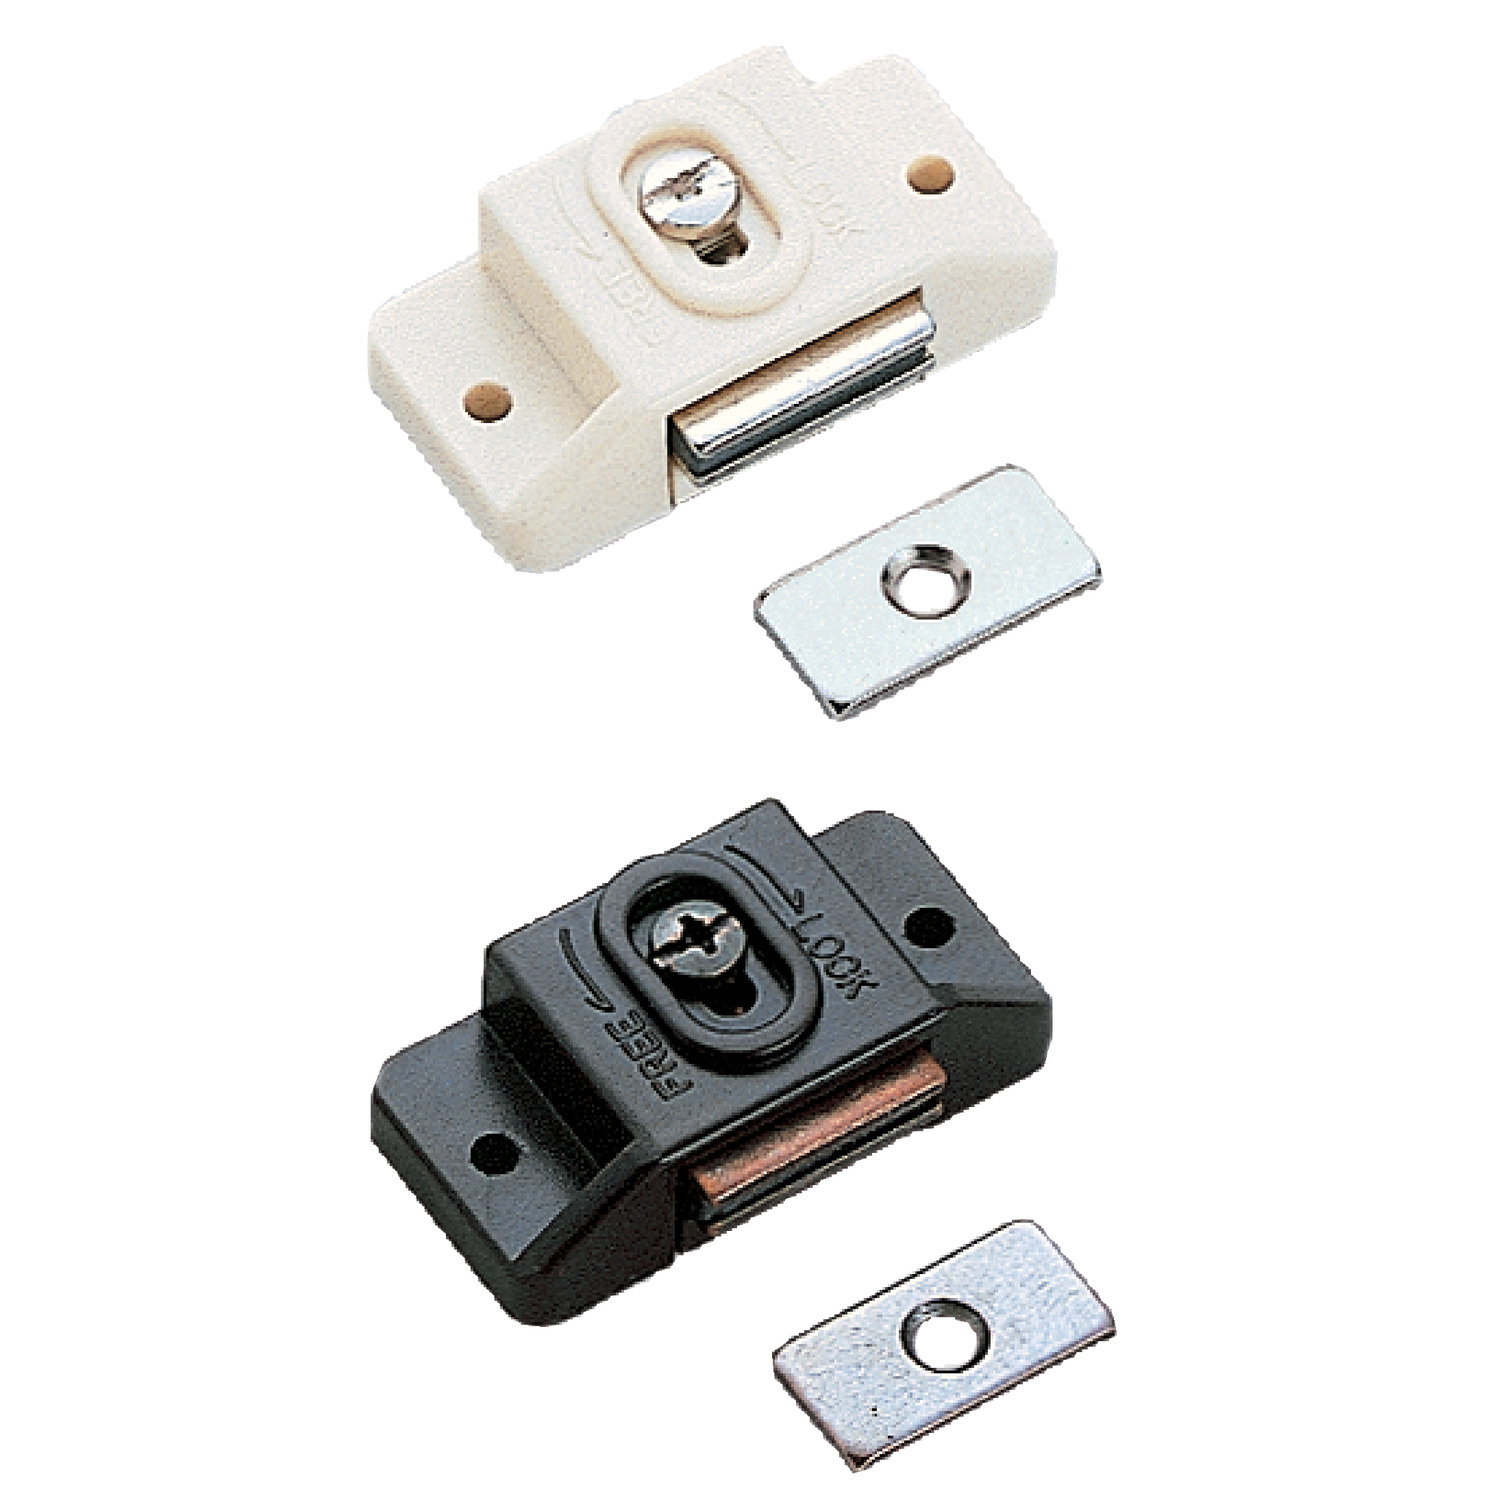 Magnetic Catches Position of the magnet is adjustable by up to 5,5mm. Allowing for variation in cover or panel positioning. Sturdy plastic housing.